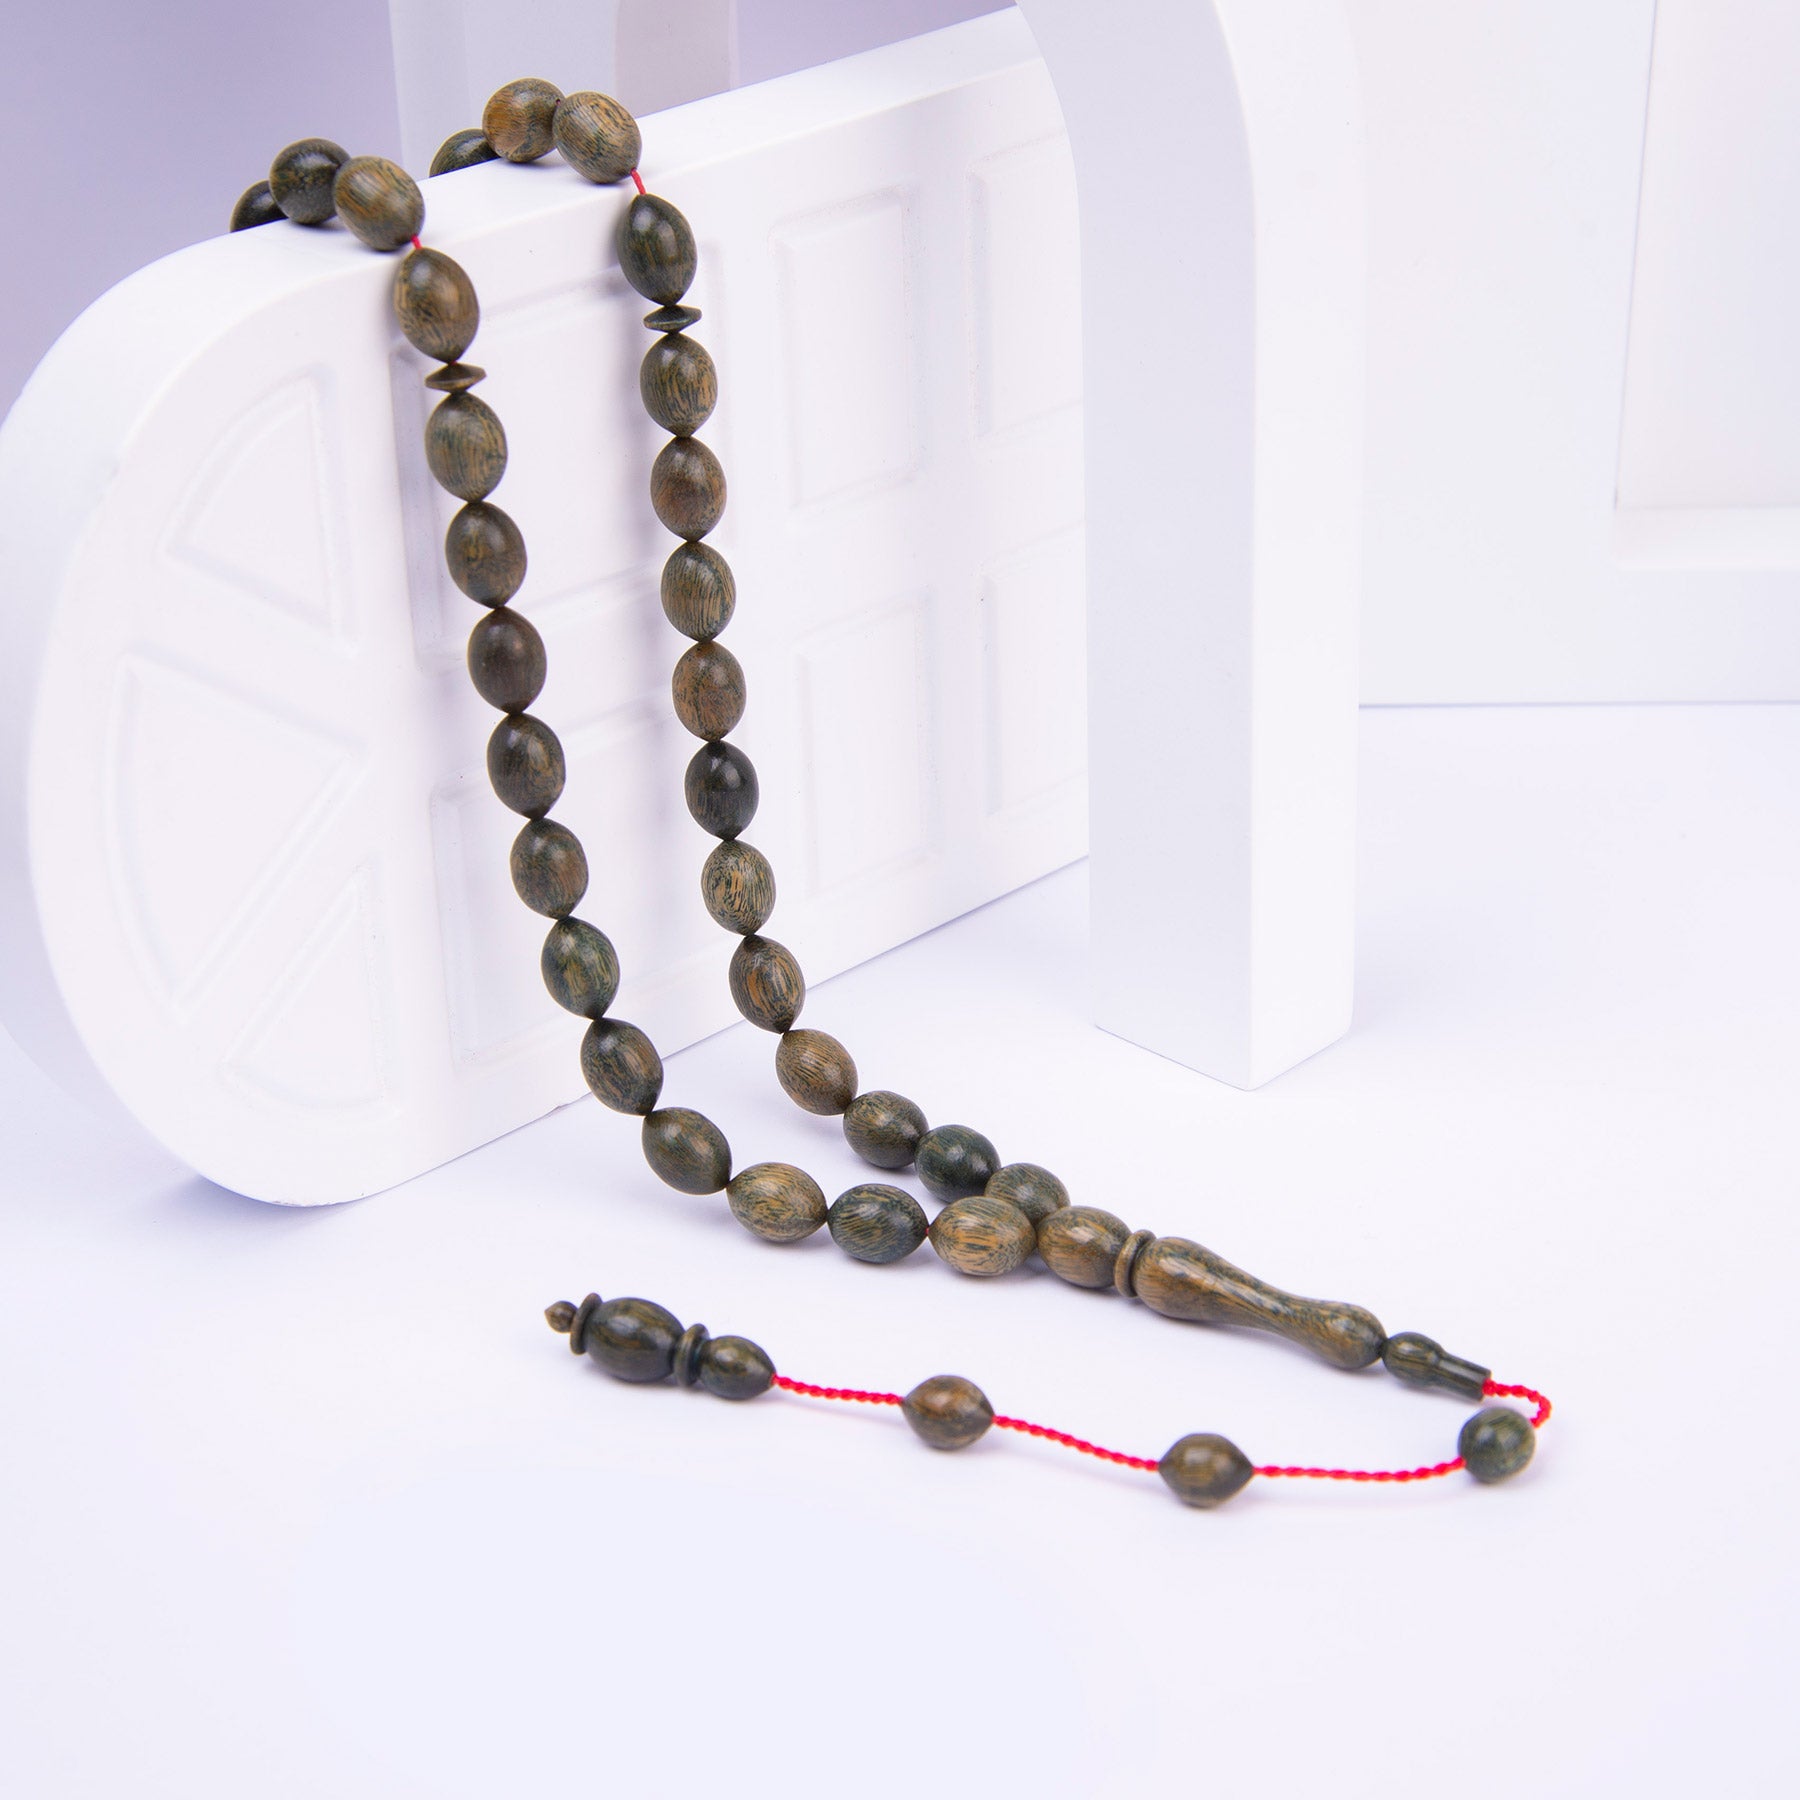 Ve Tesbih Systematic Solid Cut Green Rosewood Rosary 1